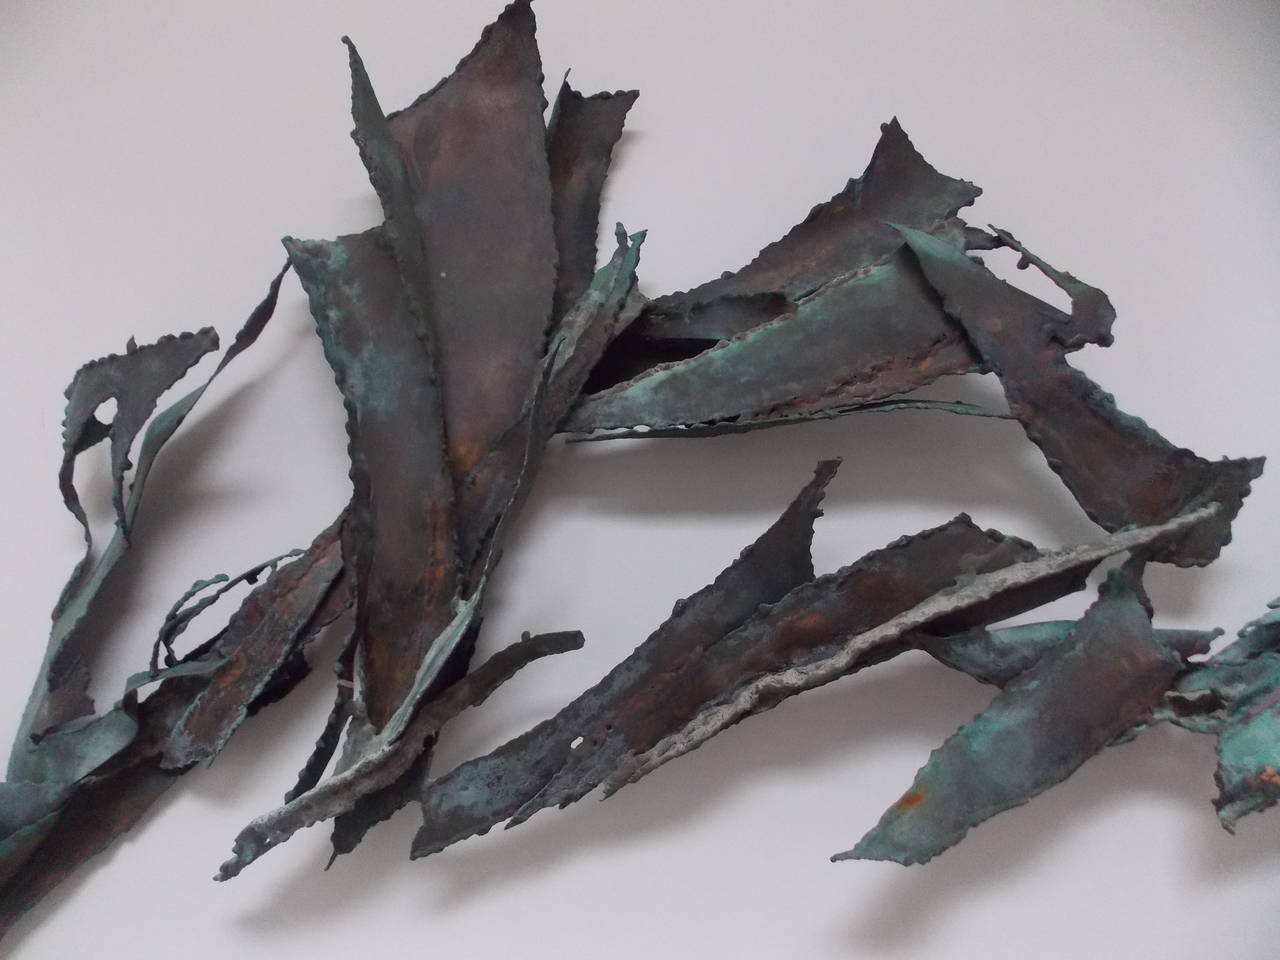 A nice decorative and timeless design.
It's made from welded torch cut bronze pieces with beautiful verdigris patina.
It's in original vintage condition, no damage.